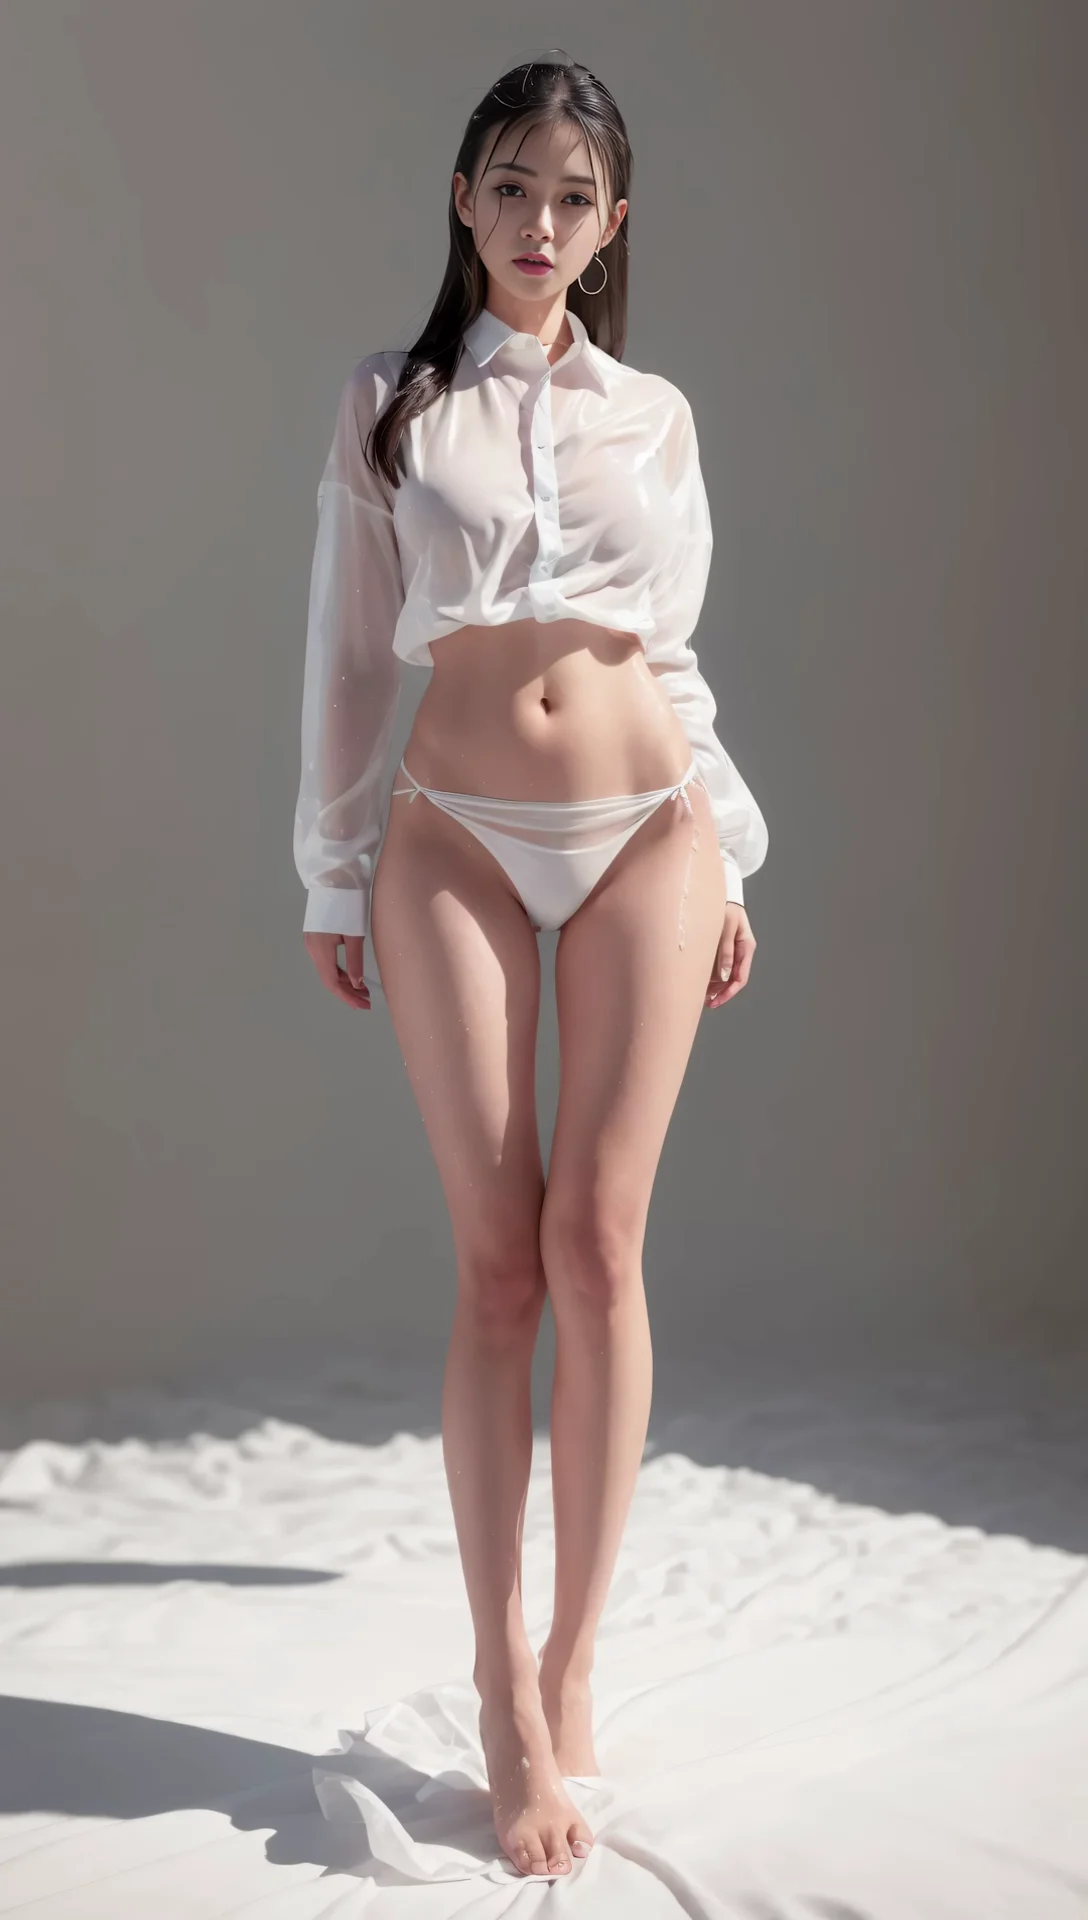 Ai Lookbook Beautiful Girl In A White Shirt And Panties Image 26